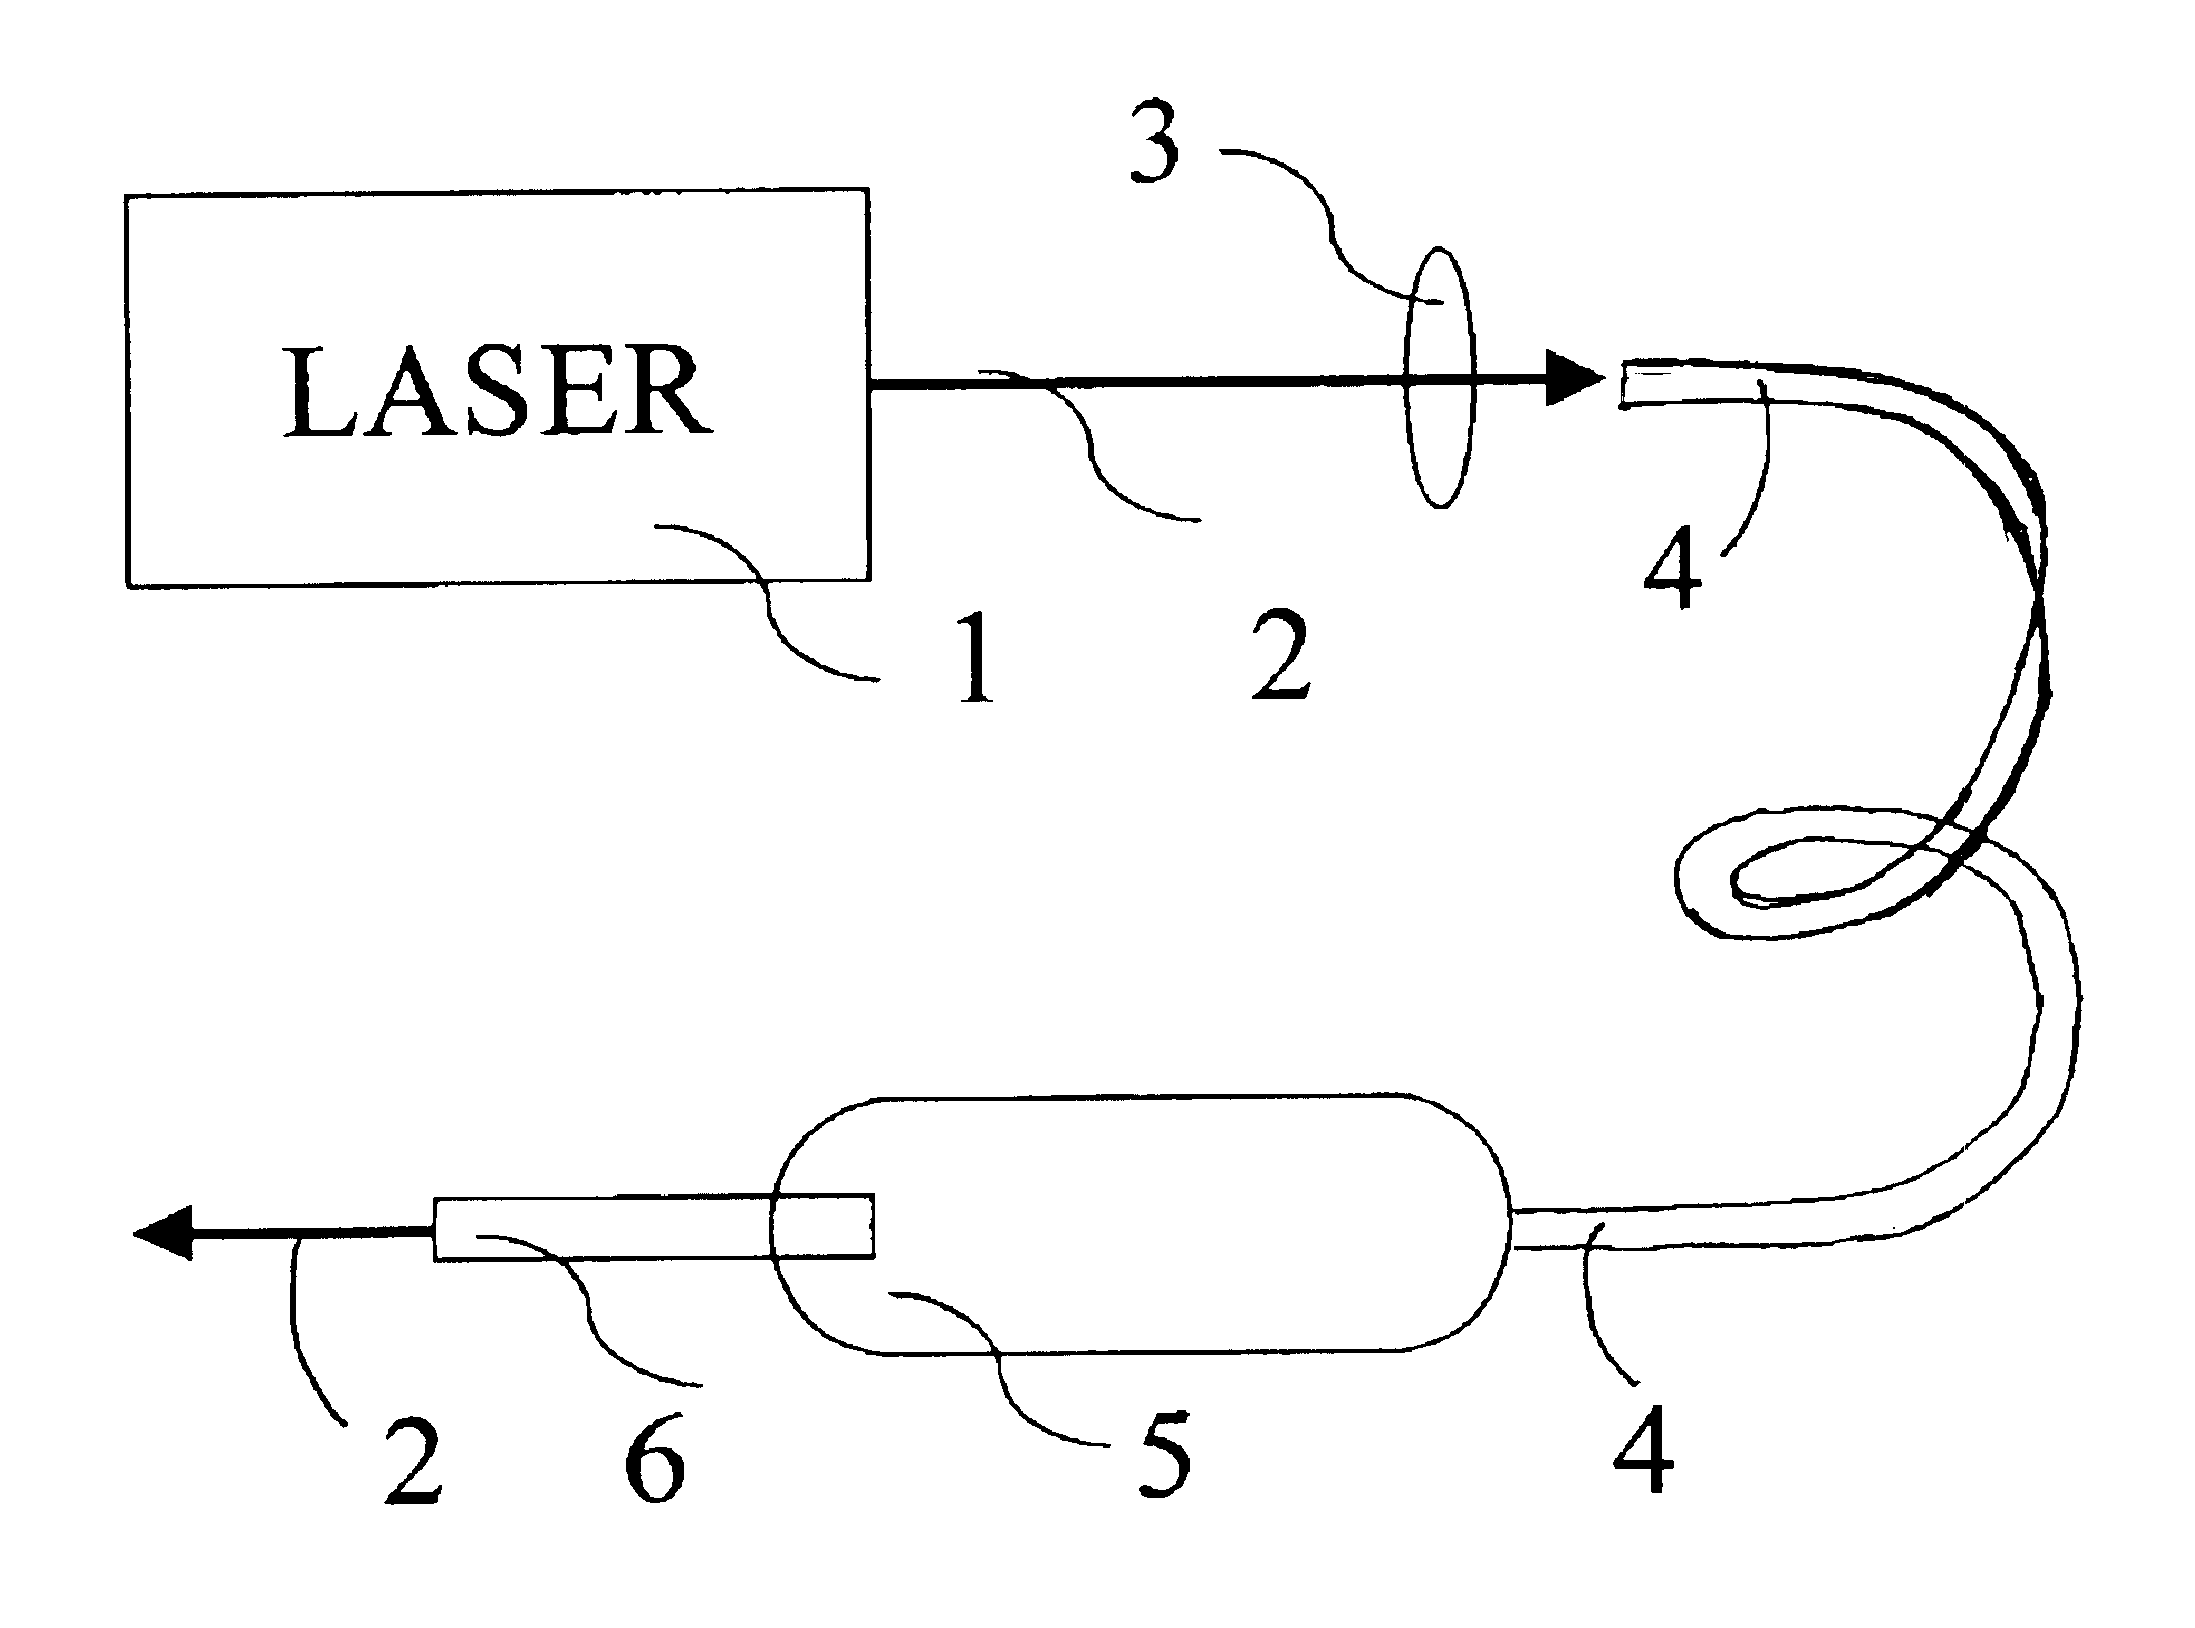 Apparatus and methods for the treatment of presbyopia using fiber-coupled-lasers